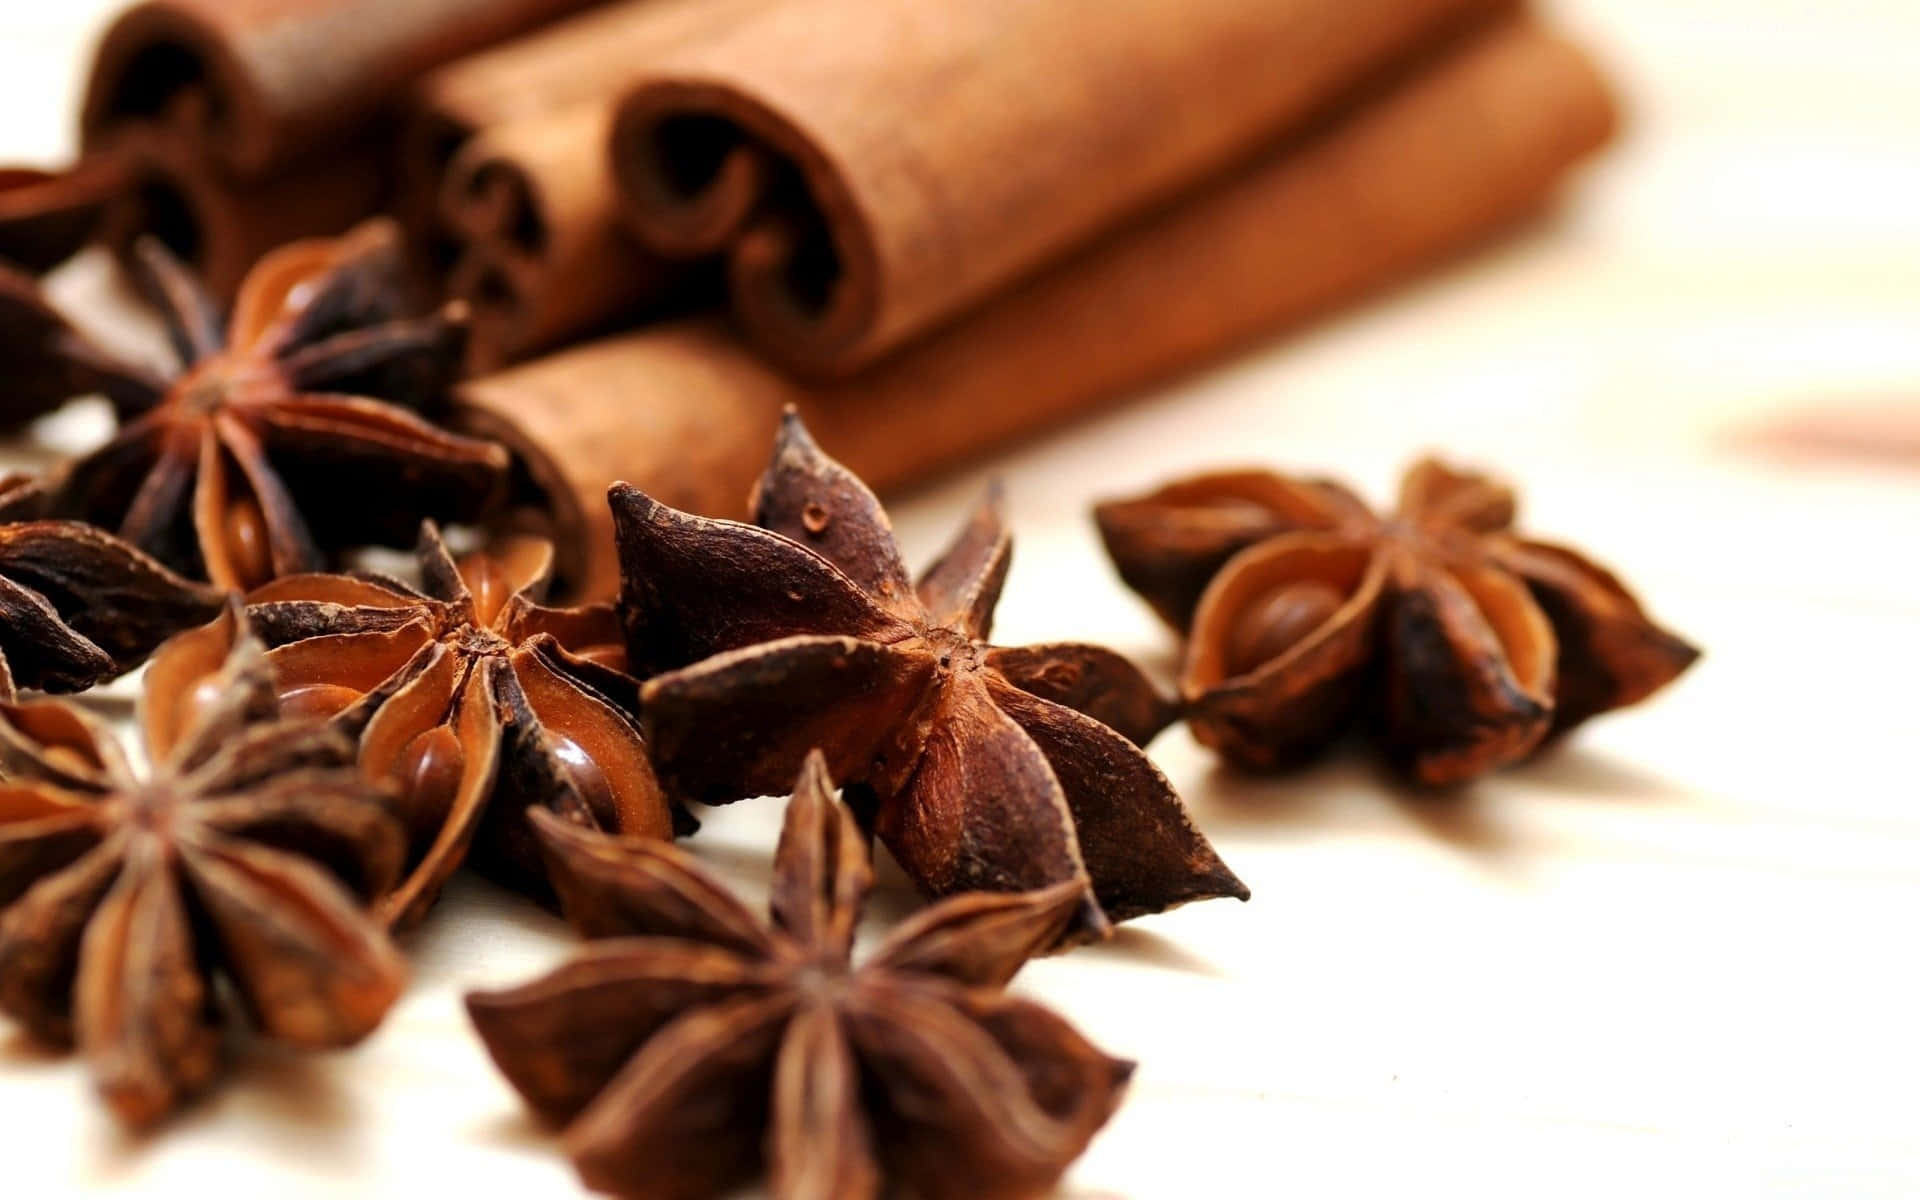 Star Anise And Cinnamon Sticks On A Wooden Table